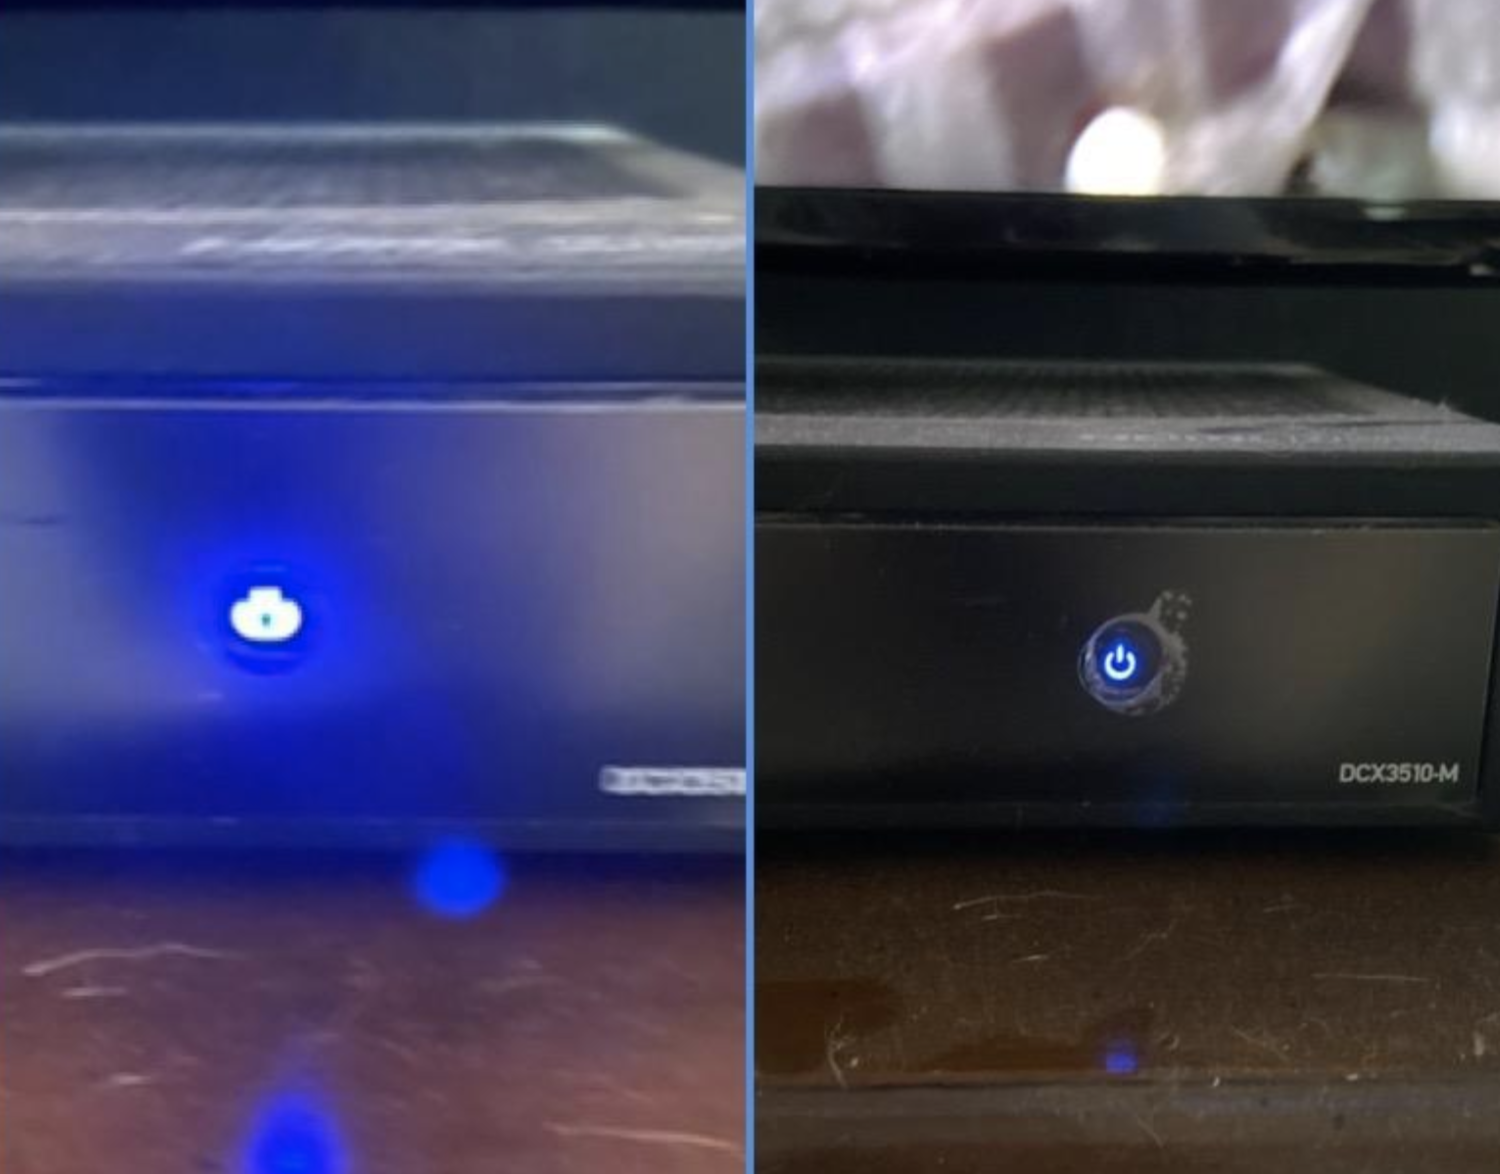 on the left, a reviewer&#x27;s device with a bright blue light, and on the right, the same device with the light less bright with the sticker over it